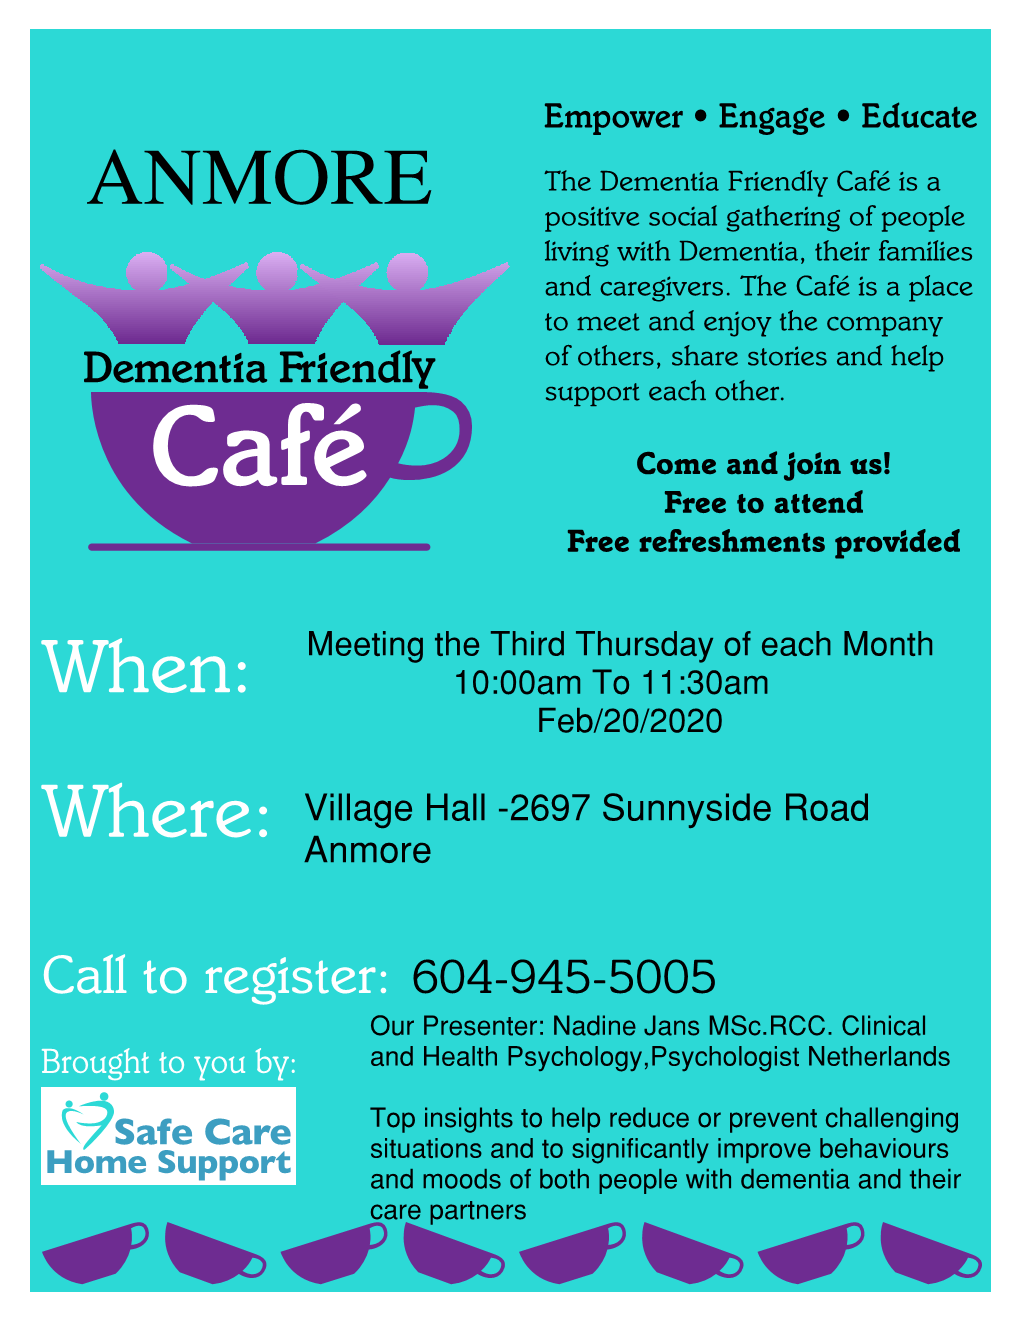 2020-02-20 Anmore Dementia Friendly Cafe 2